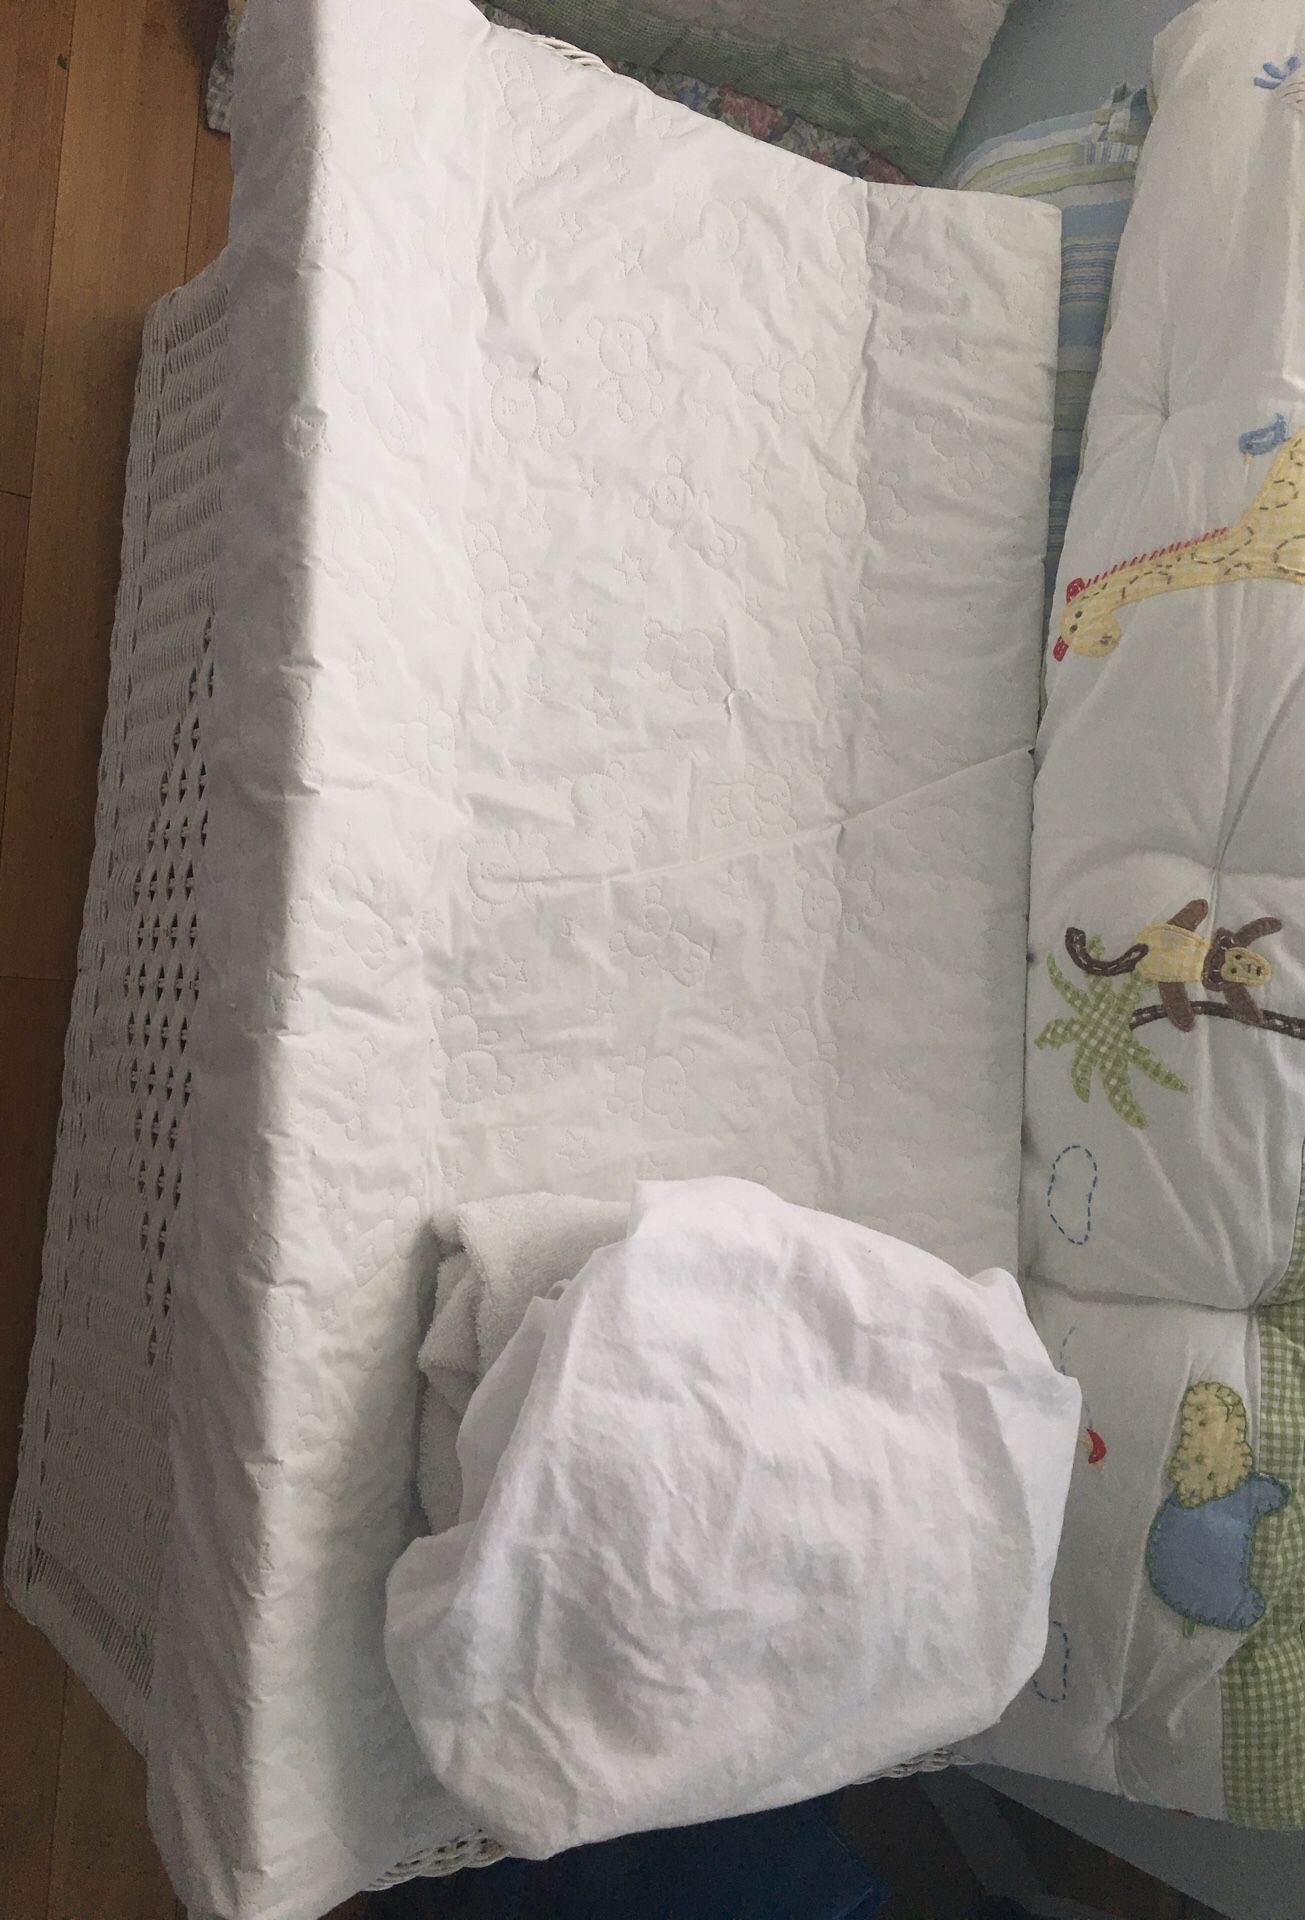 Changing table pad/ mattress with 2 covers included